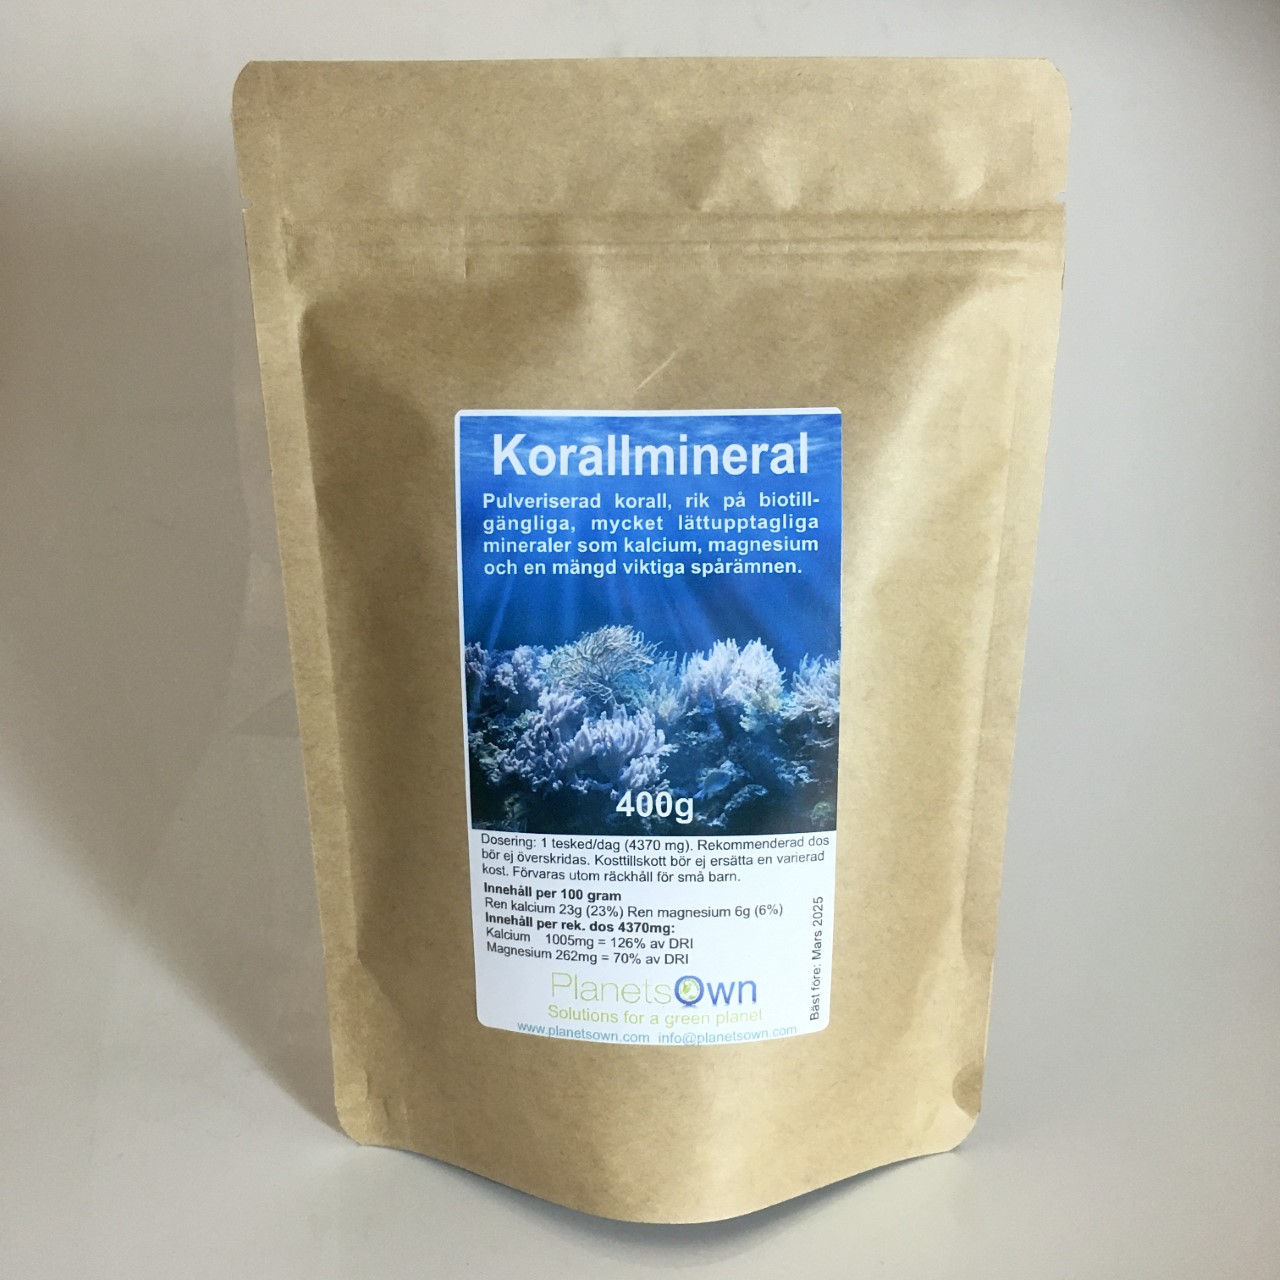 Planets Own Korallmineral 400 g